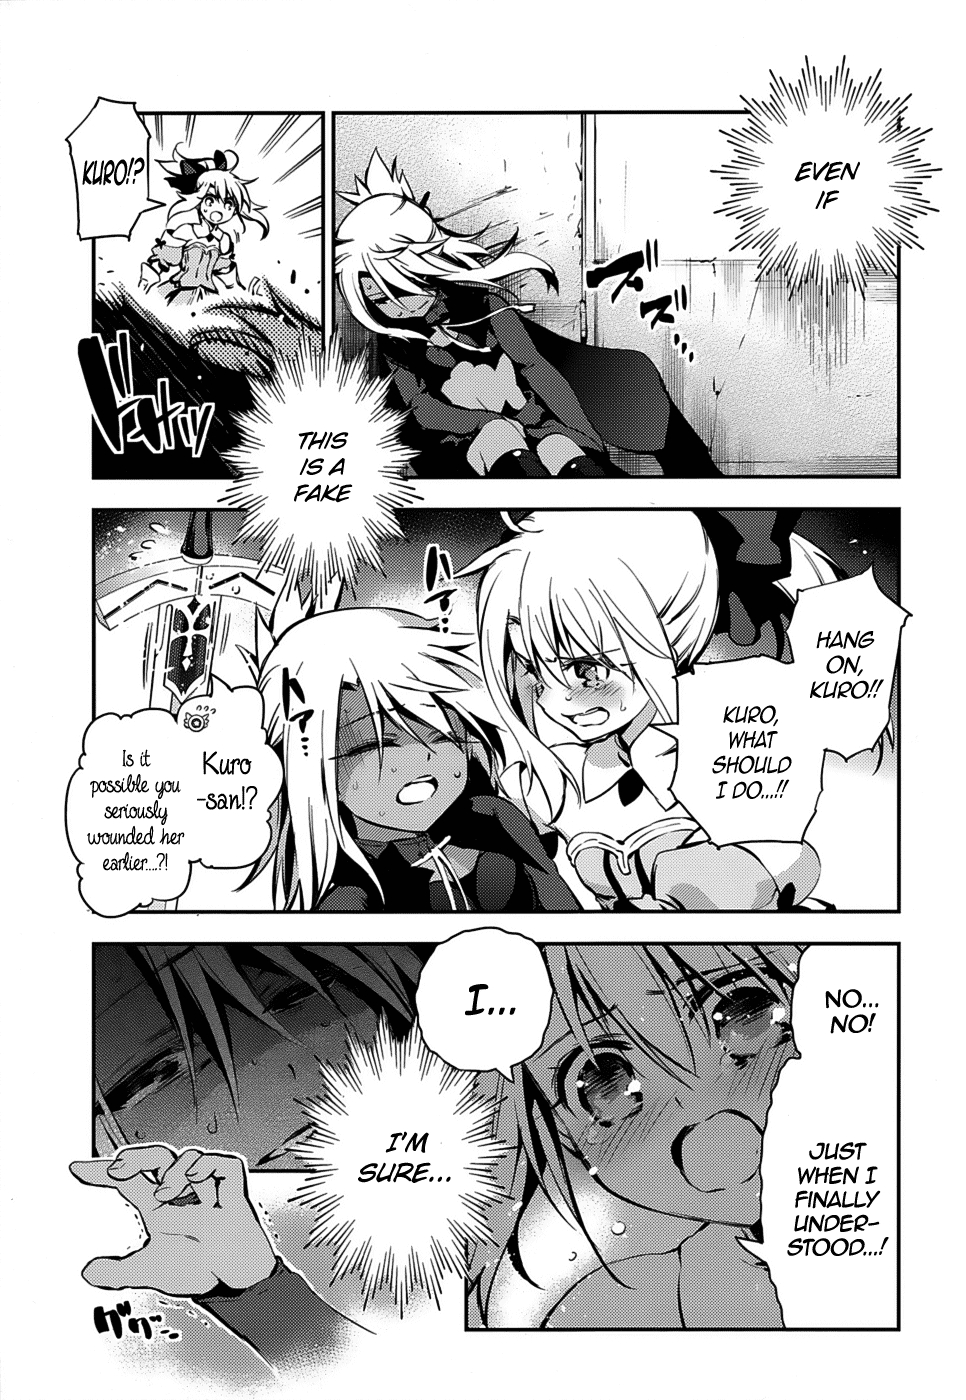 Fate/kaleid liner PRISMA☆ILLYA 3rei!! Vol. 2 Ch. 8 A Wimpy Little Sister's Welcome